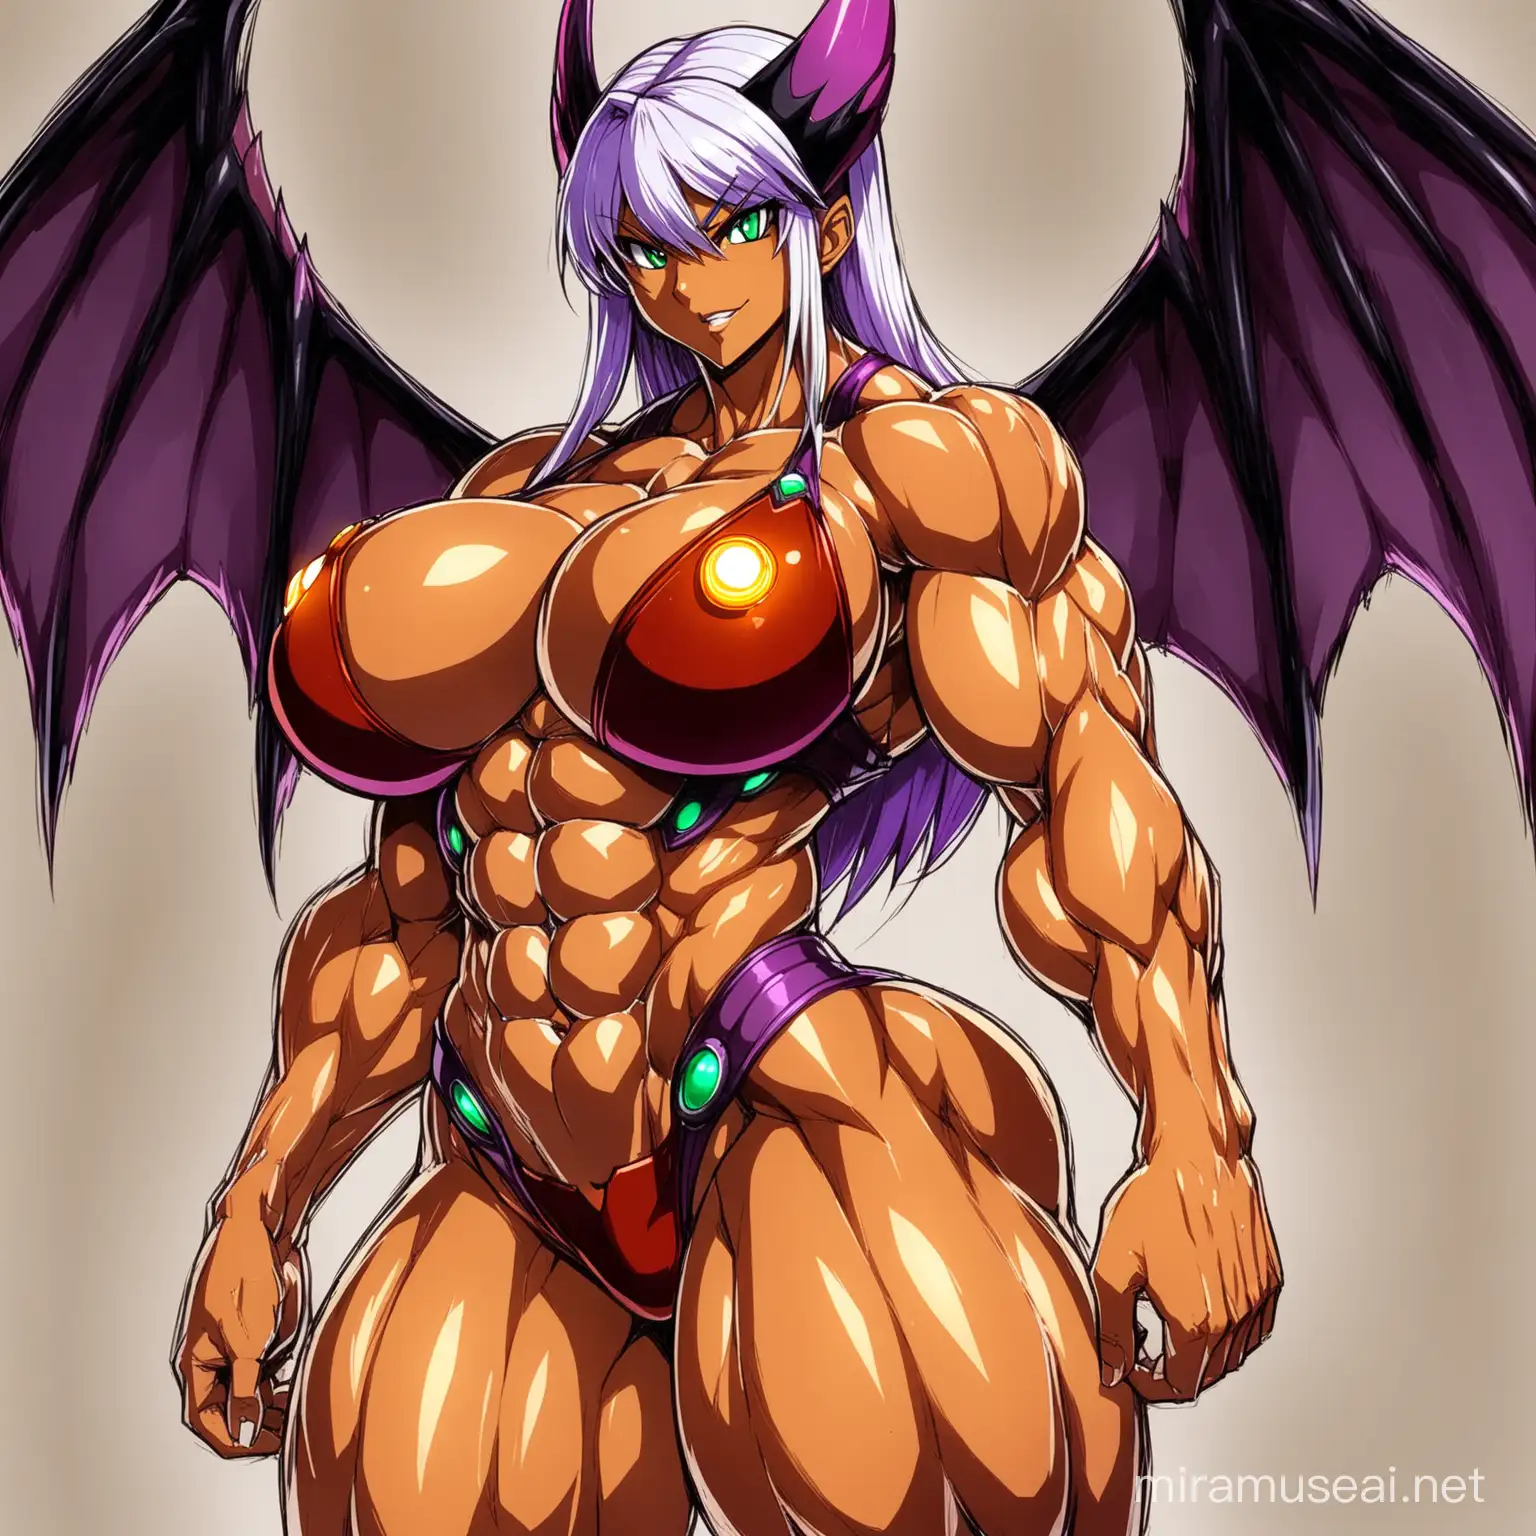 Fusion of: (((Generalissimo Samus Aran from "Metroid" Empress Morrigan Aensland from "Darkstalkers"))), (((amazingly gigantic breast))),(((muscularly voluptuous body))),((((muscular abs,tanned-skin)))), by artist "Sui Ishida",